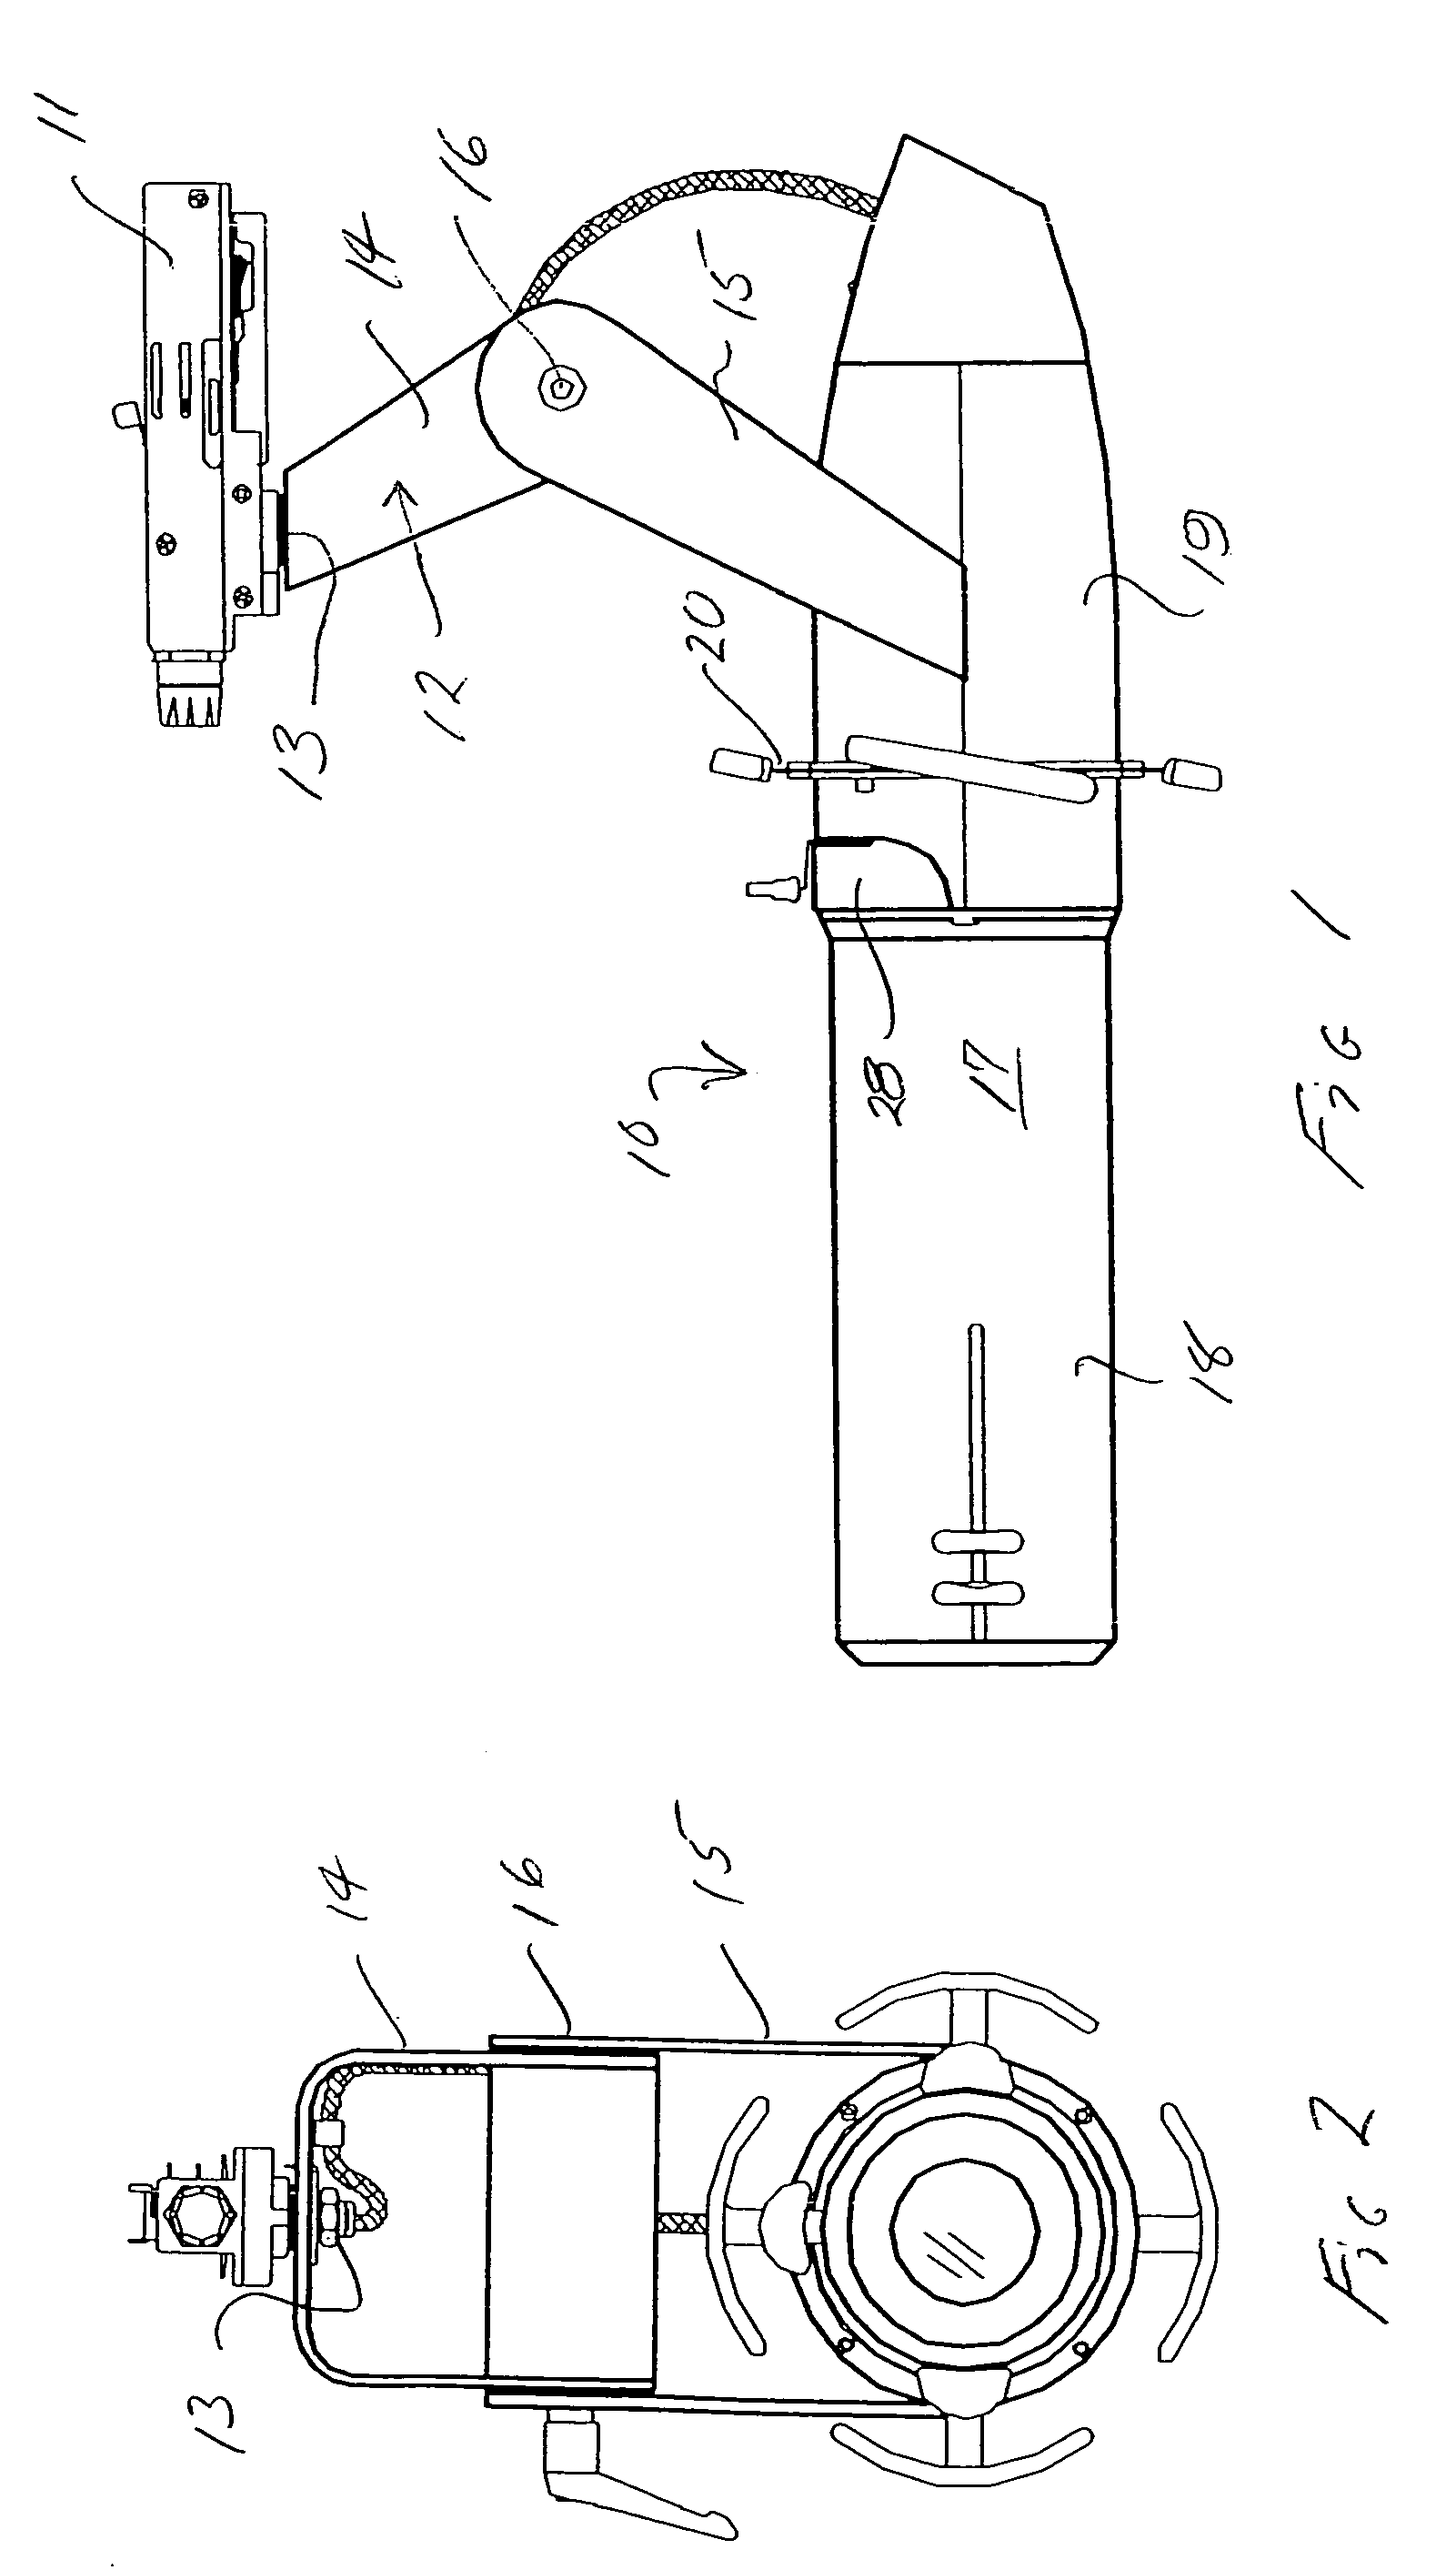 Shutter lock for specialized lighting fixtures